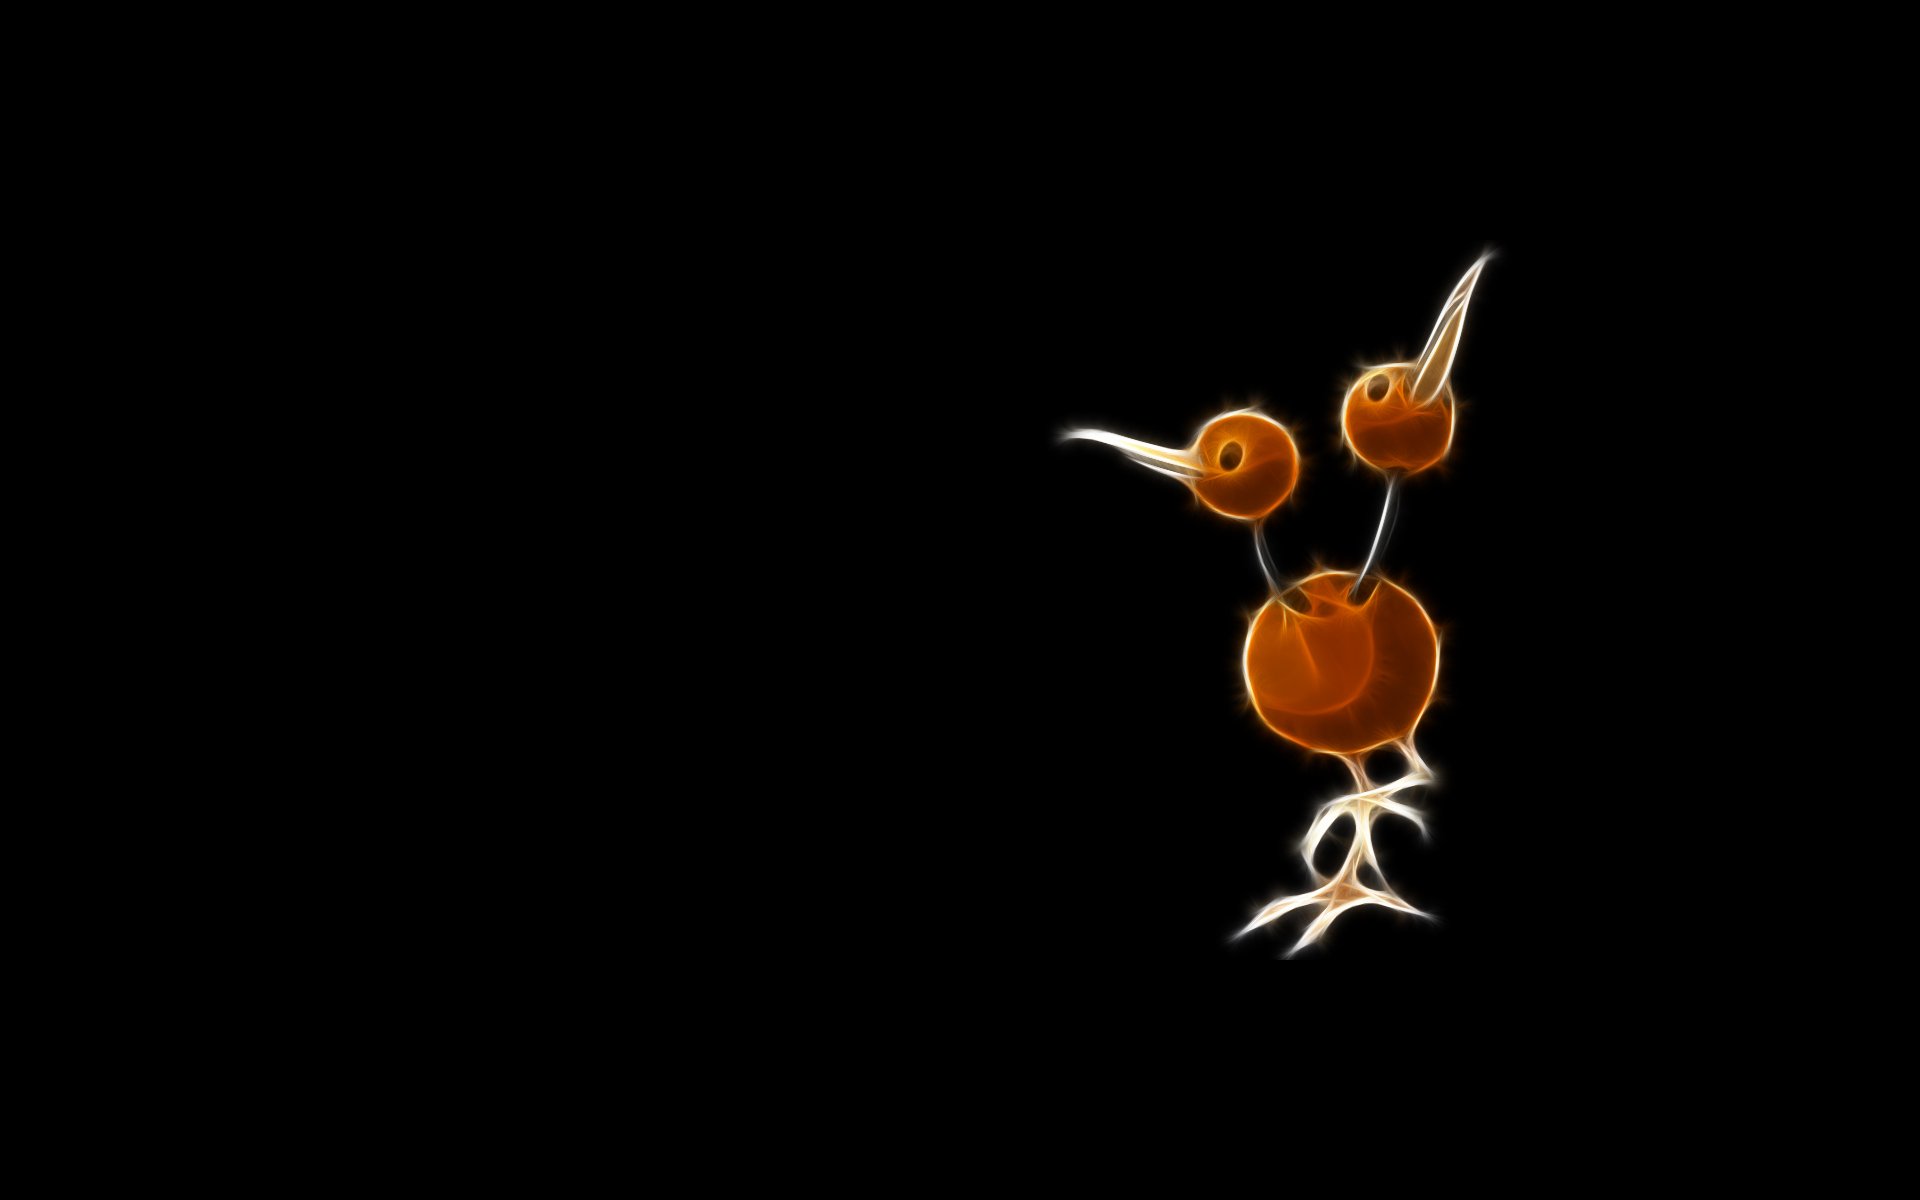 Doduo Wallpapers Doduo Myspace Backgrounds Doduo Backgrounds For 1920x1200